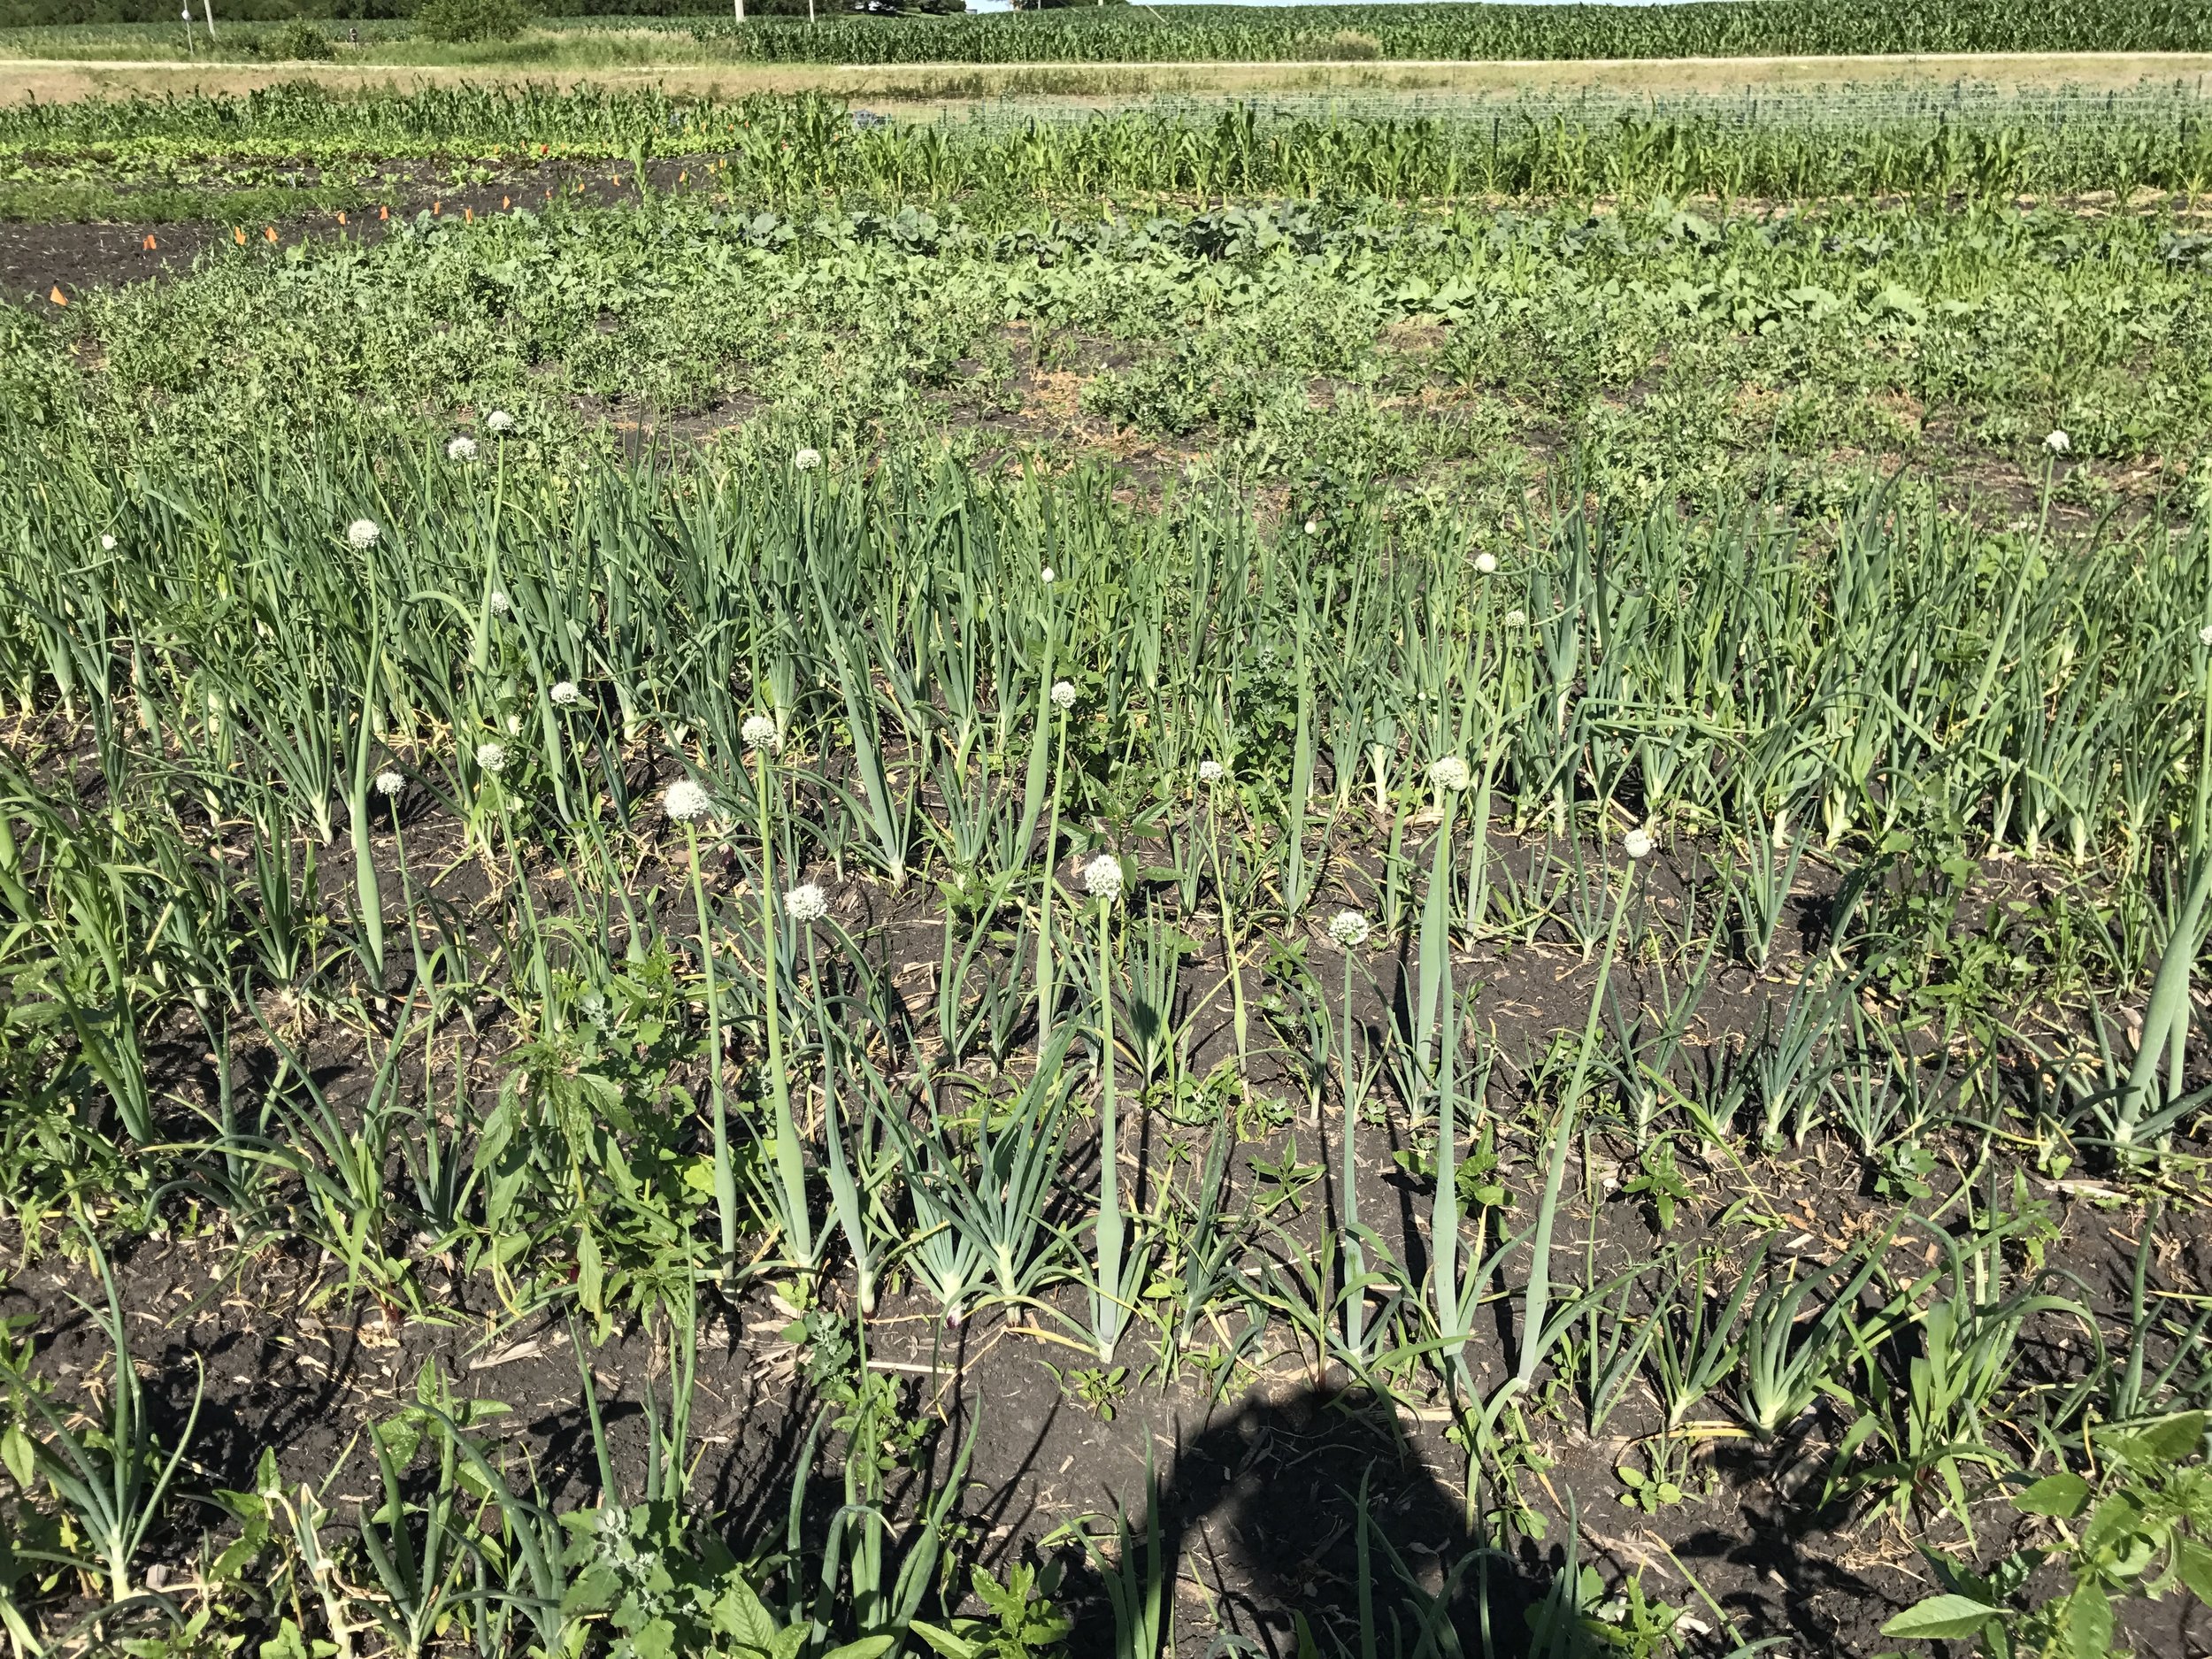  Onions. The white orbs you see are flower bulbs. 